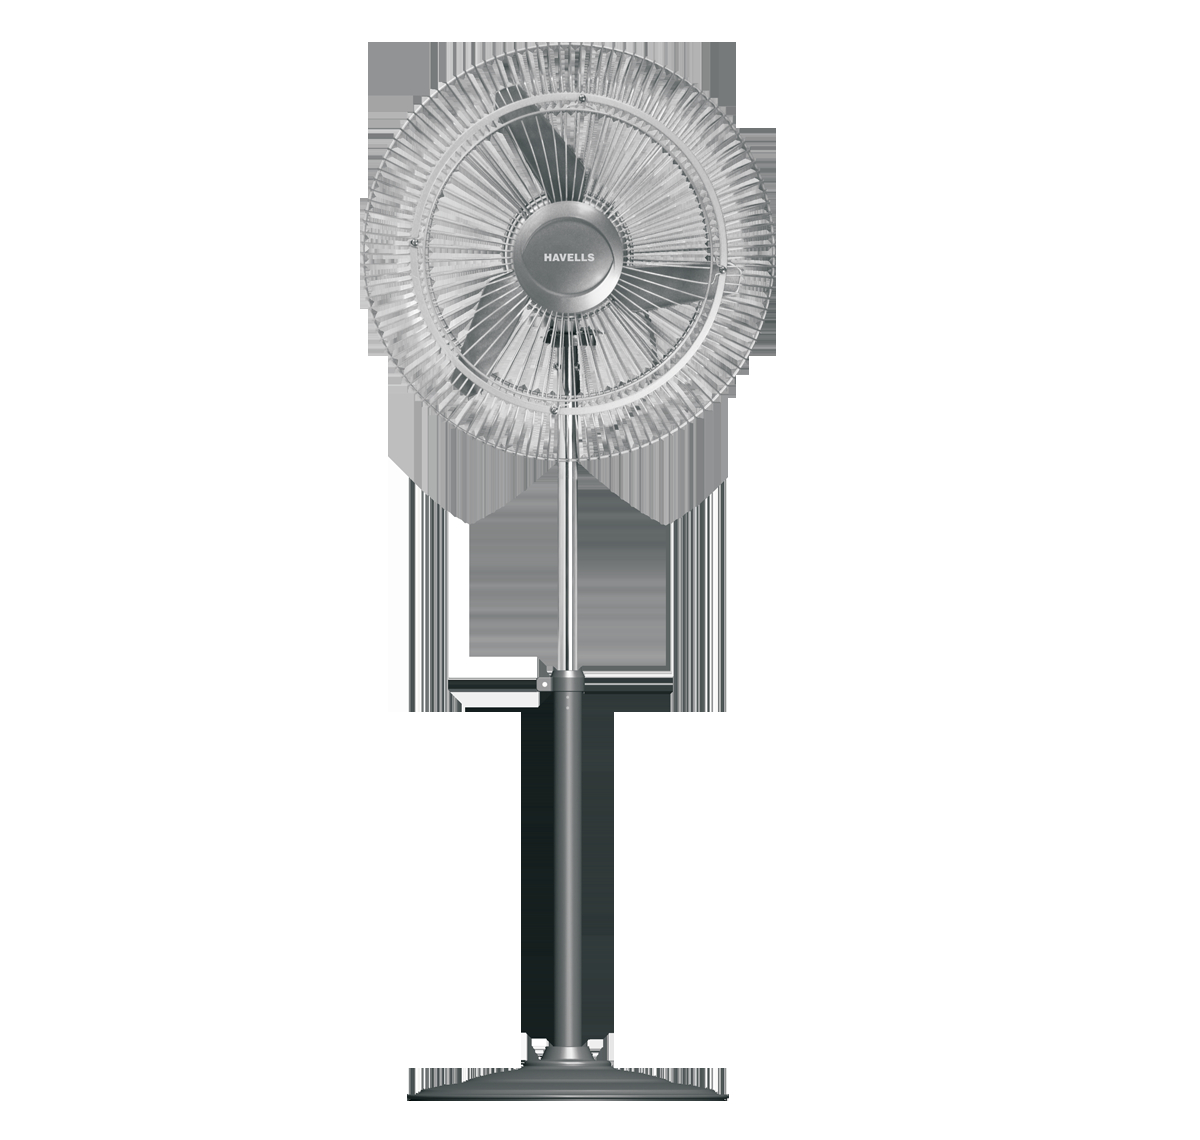 Havells Heavy Duty Exhaust Fan Turboforce Pedestal throughout sizing 1200 X 1140